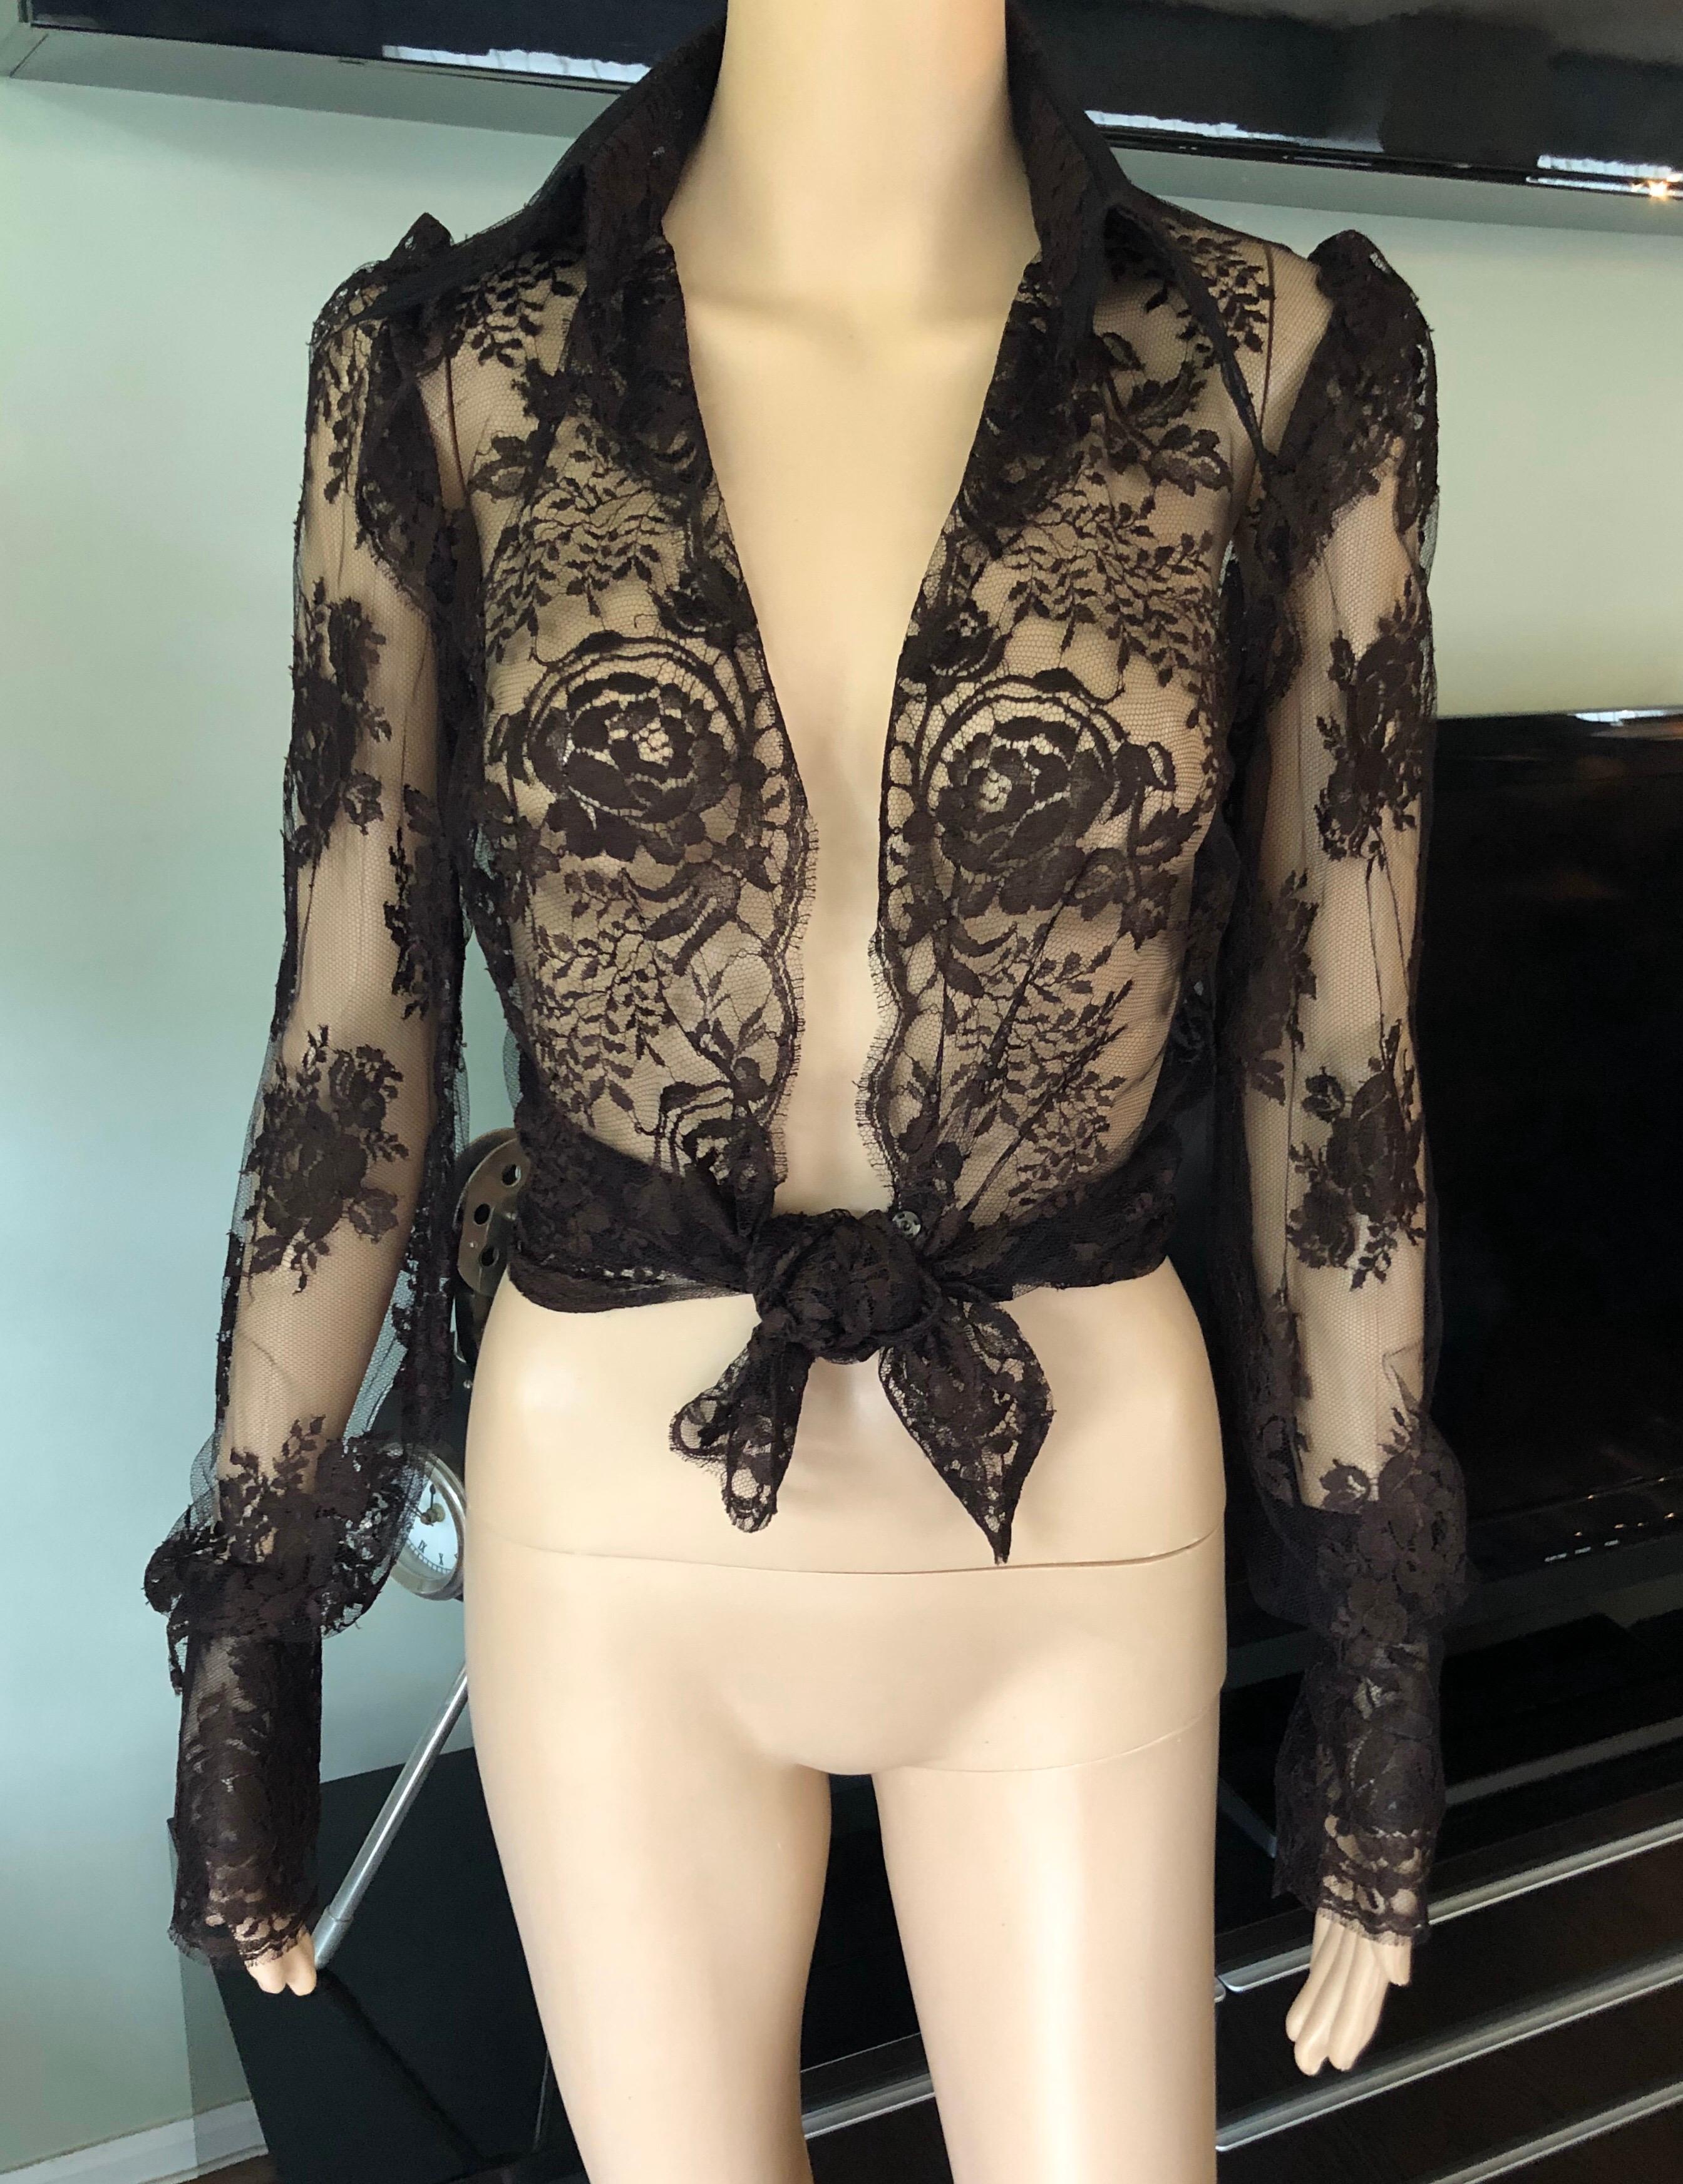 Dolce & Gabbana Vintage Sheer Lace Long Sleeve Brown Shirt Top IT 40

Dolce & Gabbana lace top with pointed collar, long sleeves and snap closures at front.
